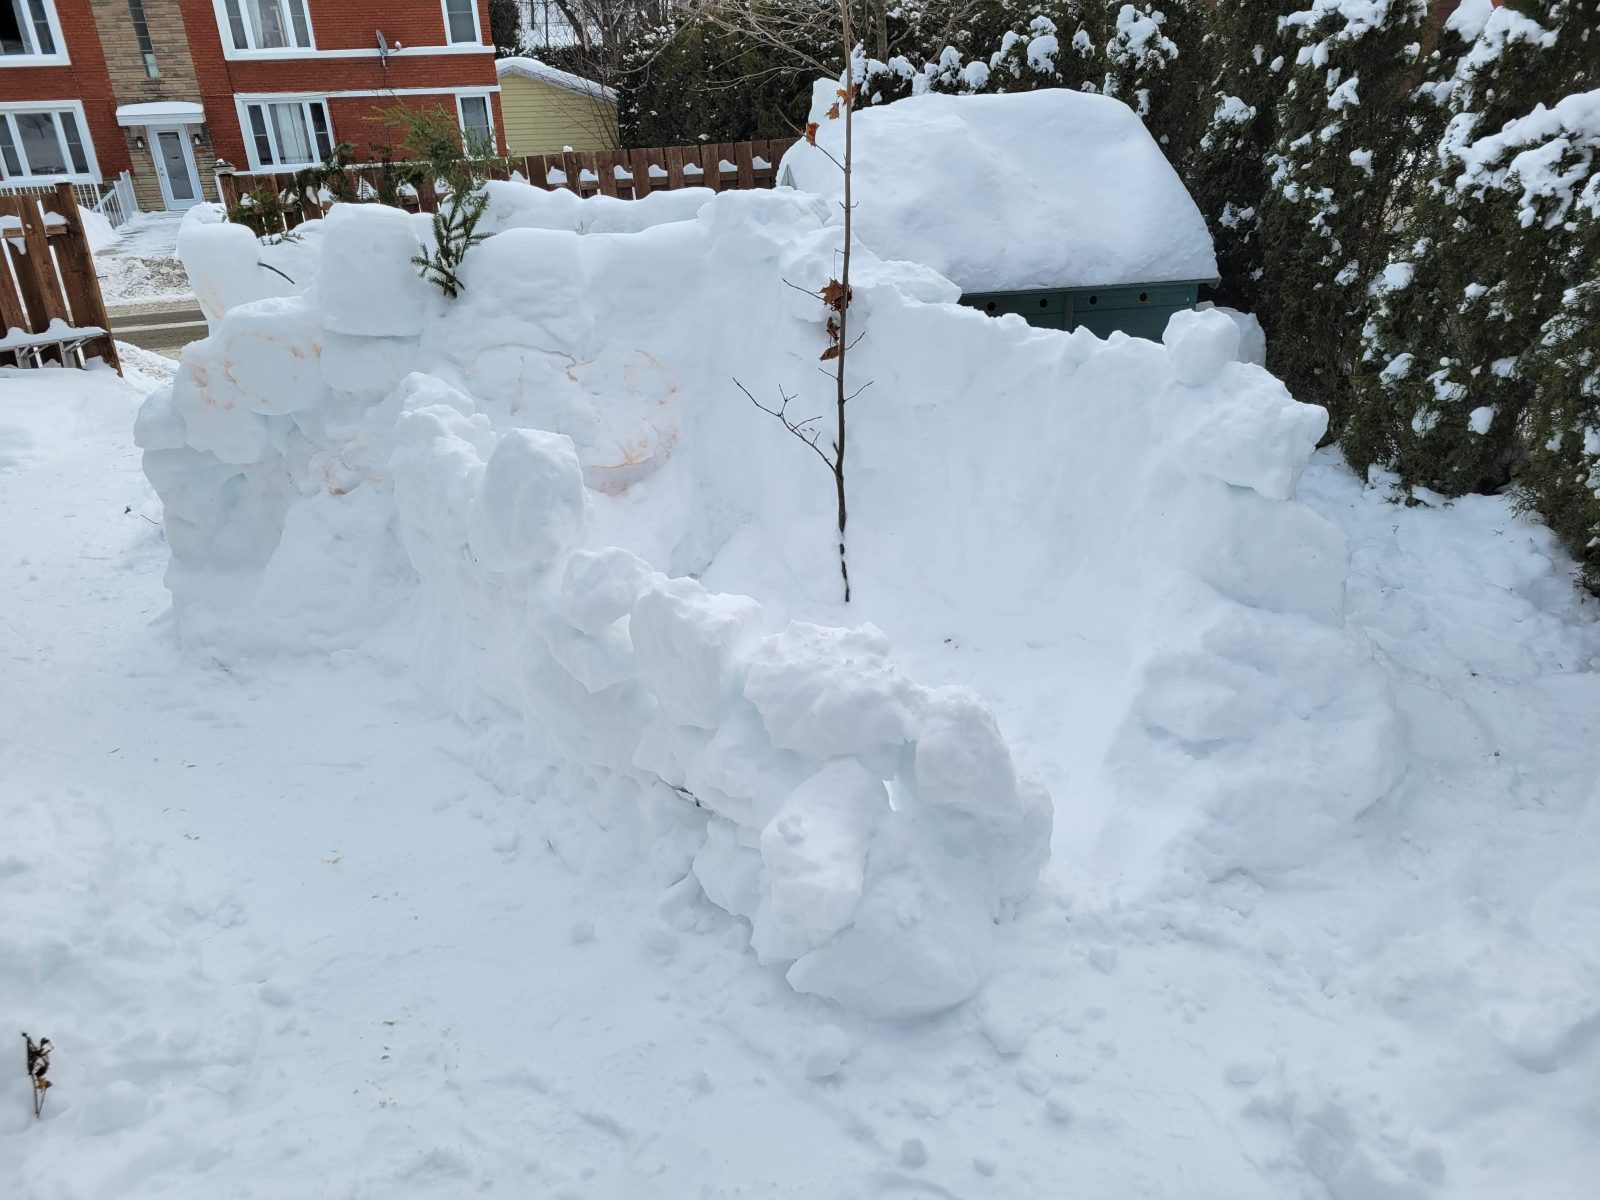 Snow fort builders not beaten by shortage of snow